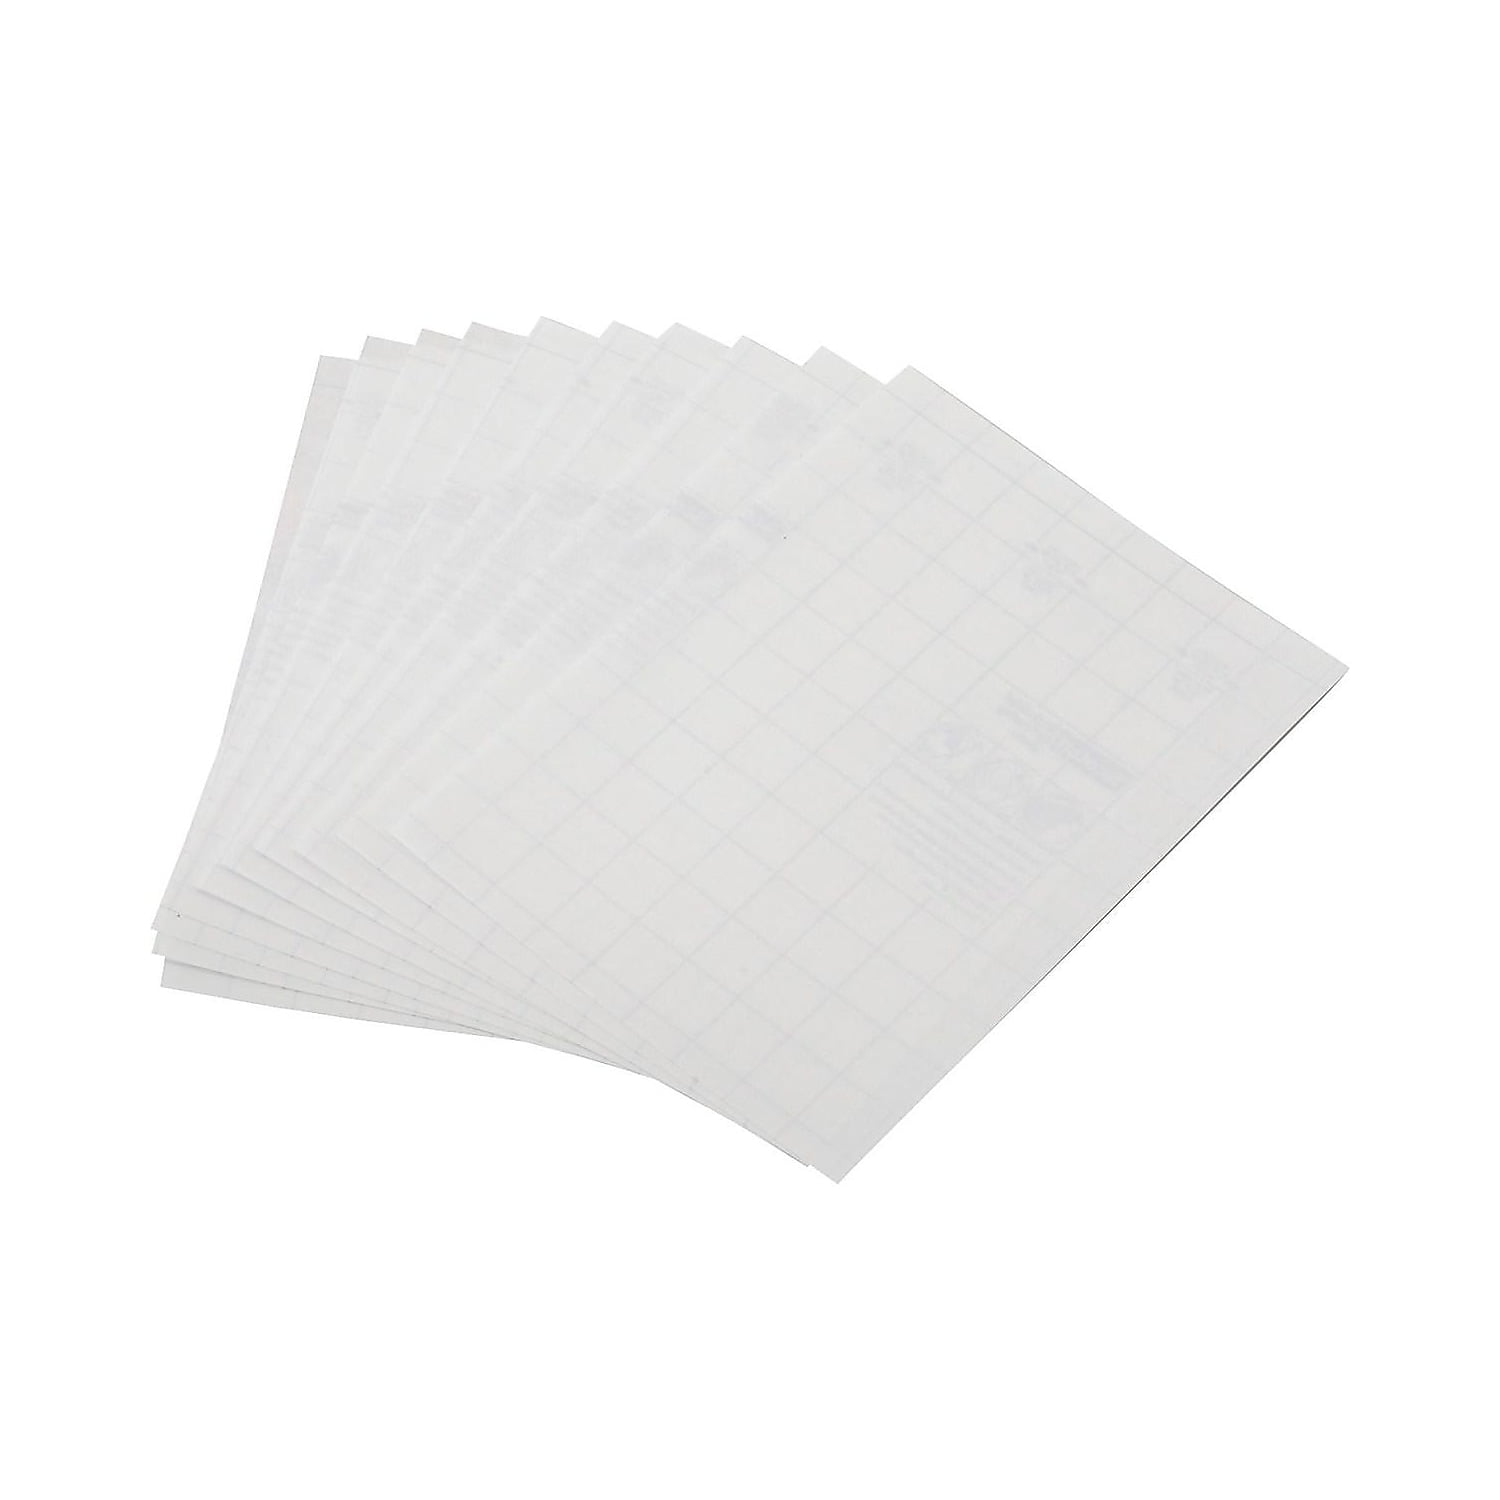 100-Pack Self-Adhesive Laminating Sheets by Office Square Self-Seal No Machine